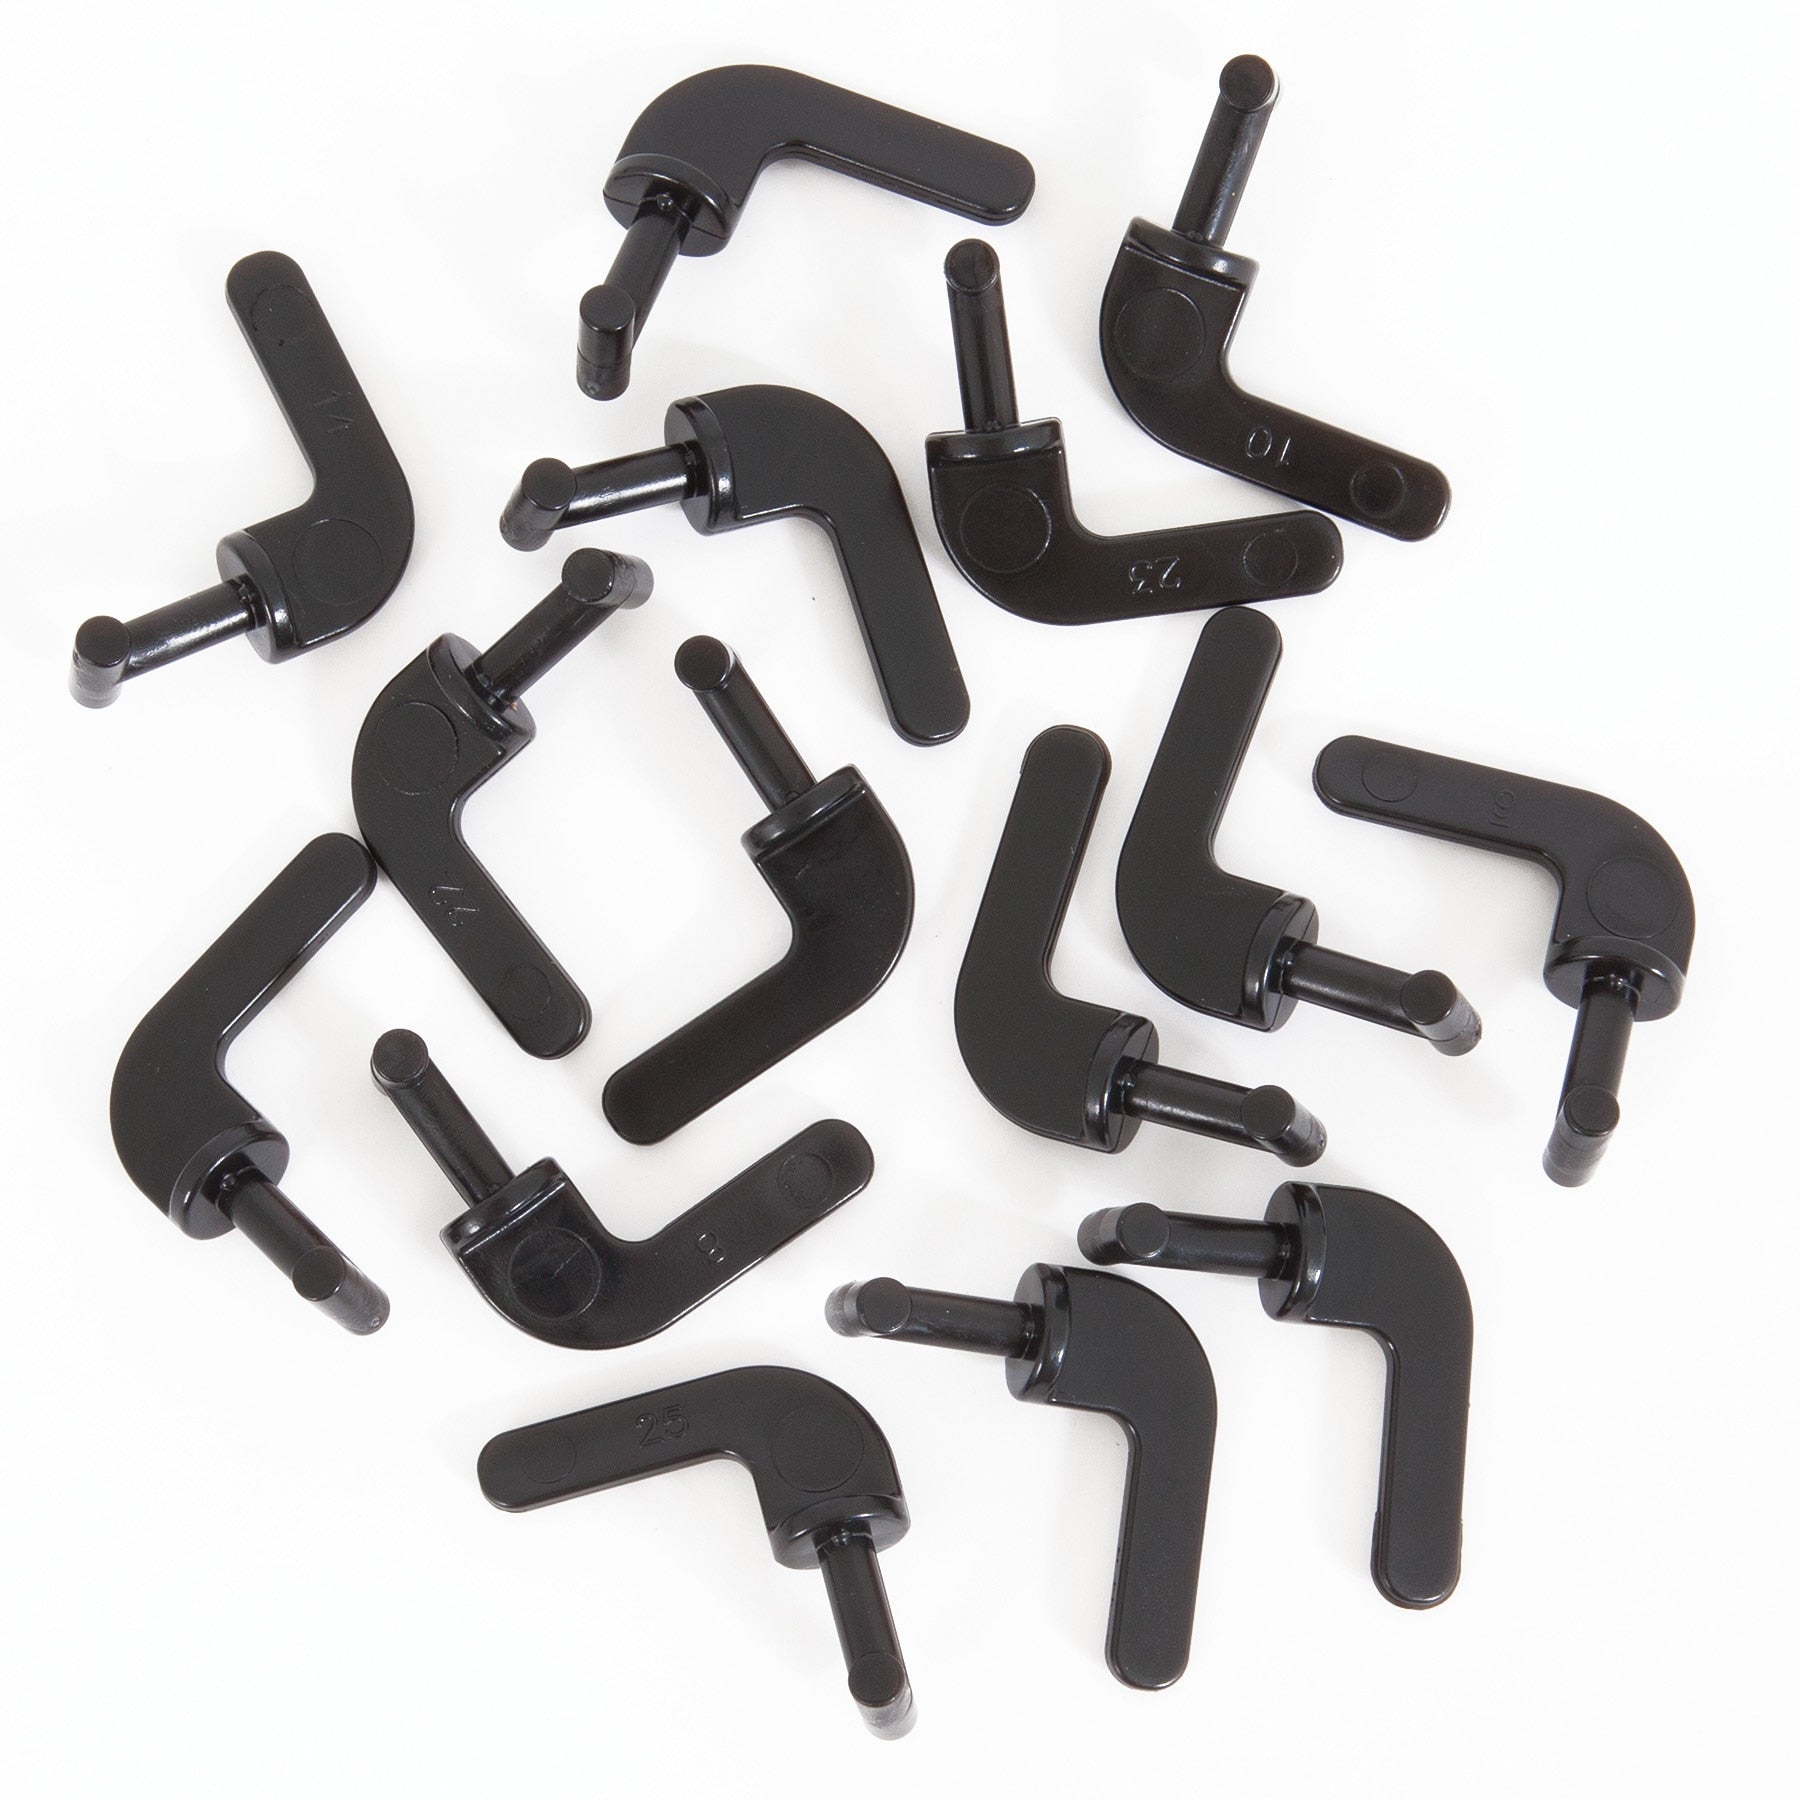 Replacement Plastic Kennel Fasteners. SKUS: 420244